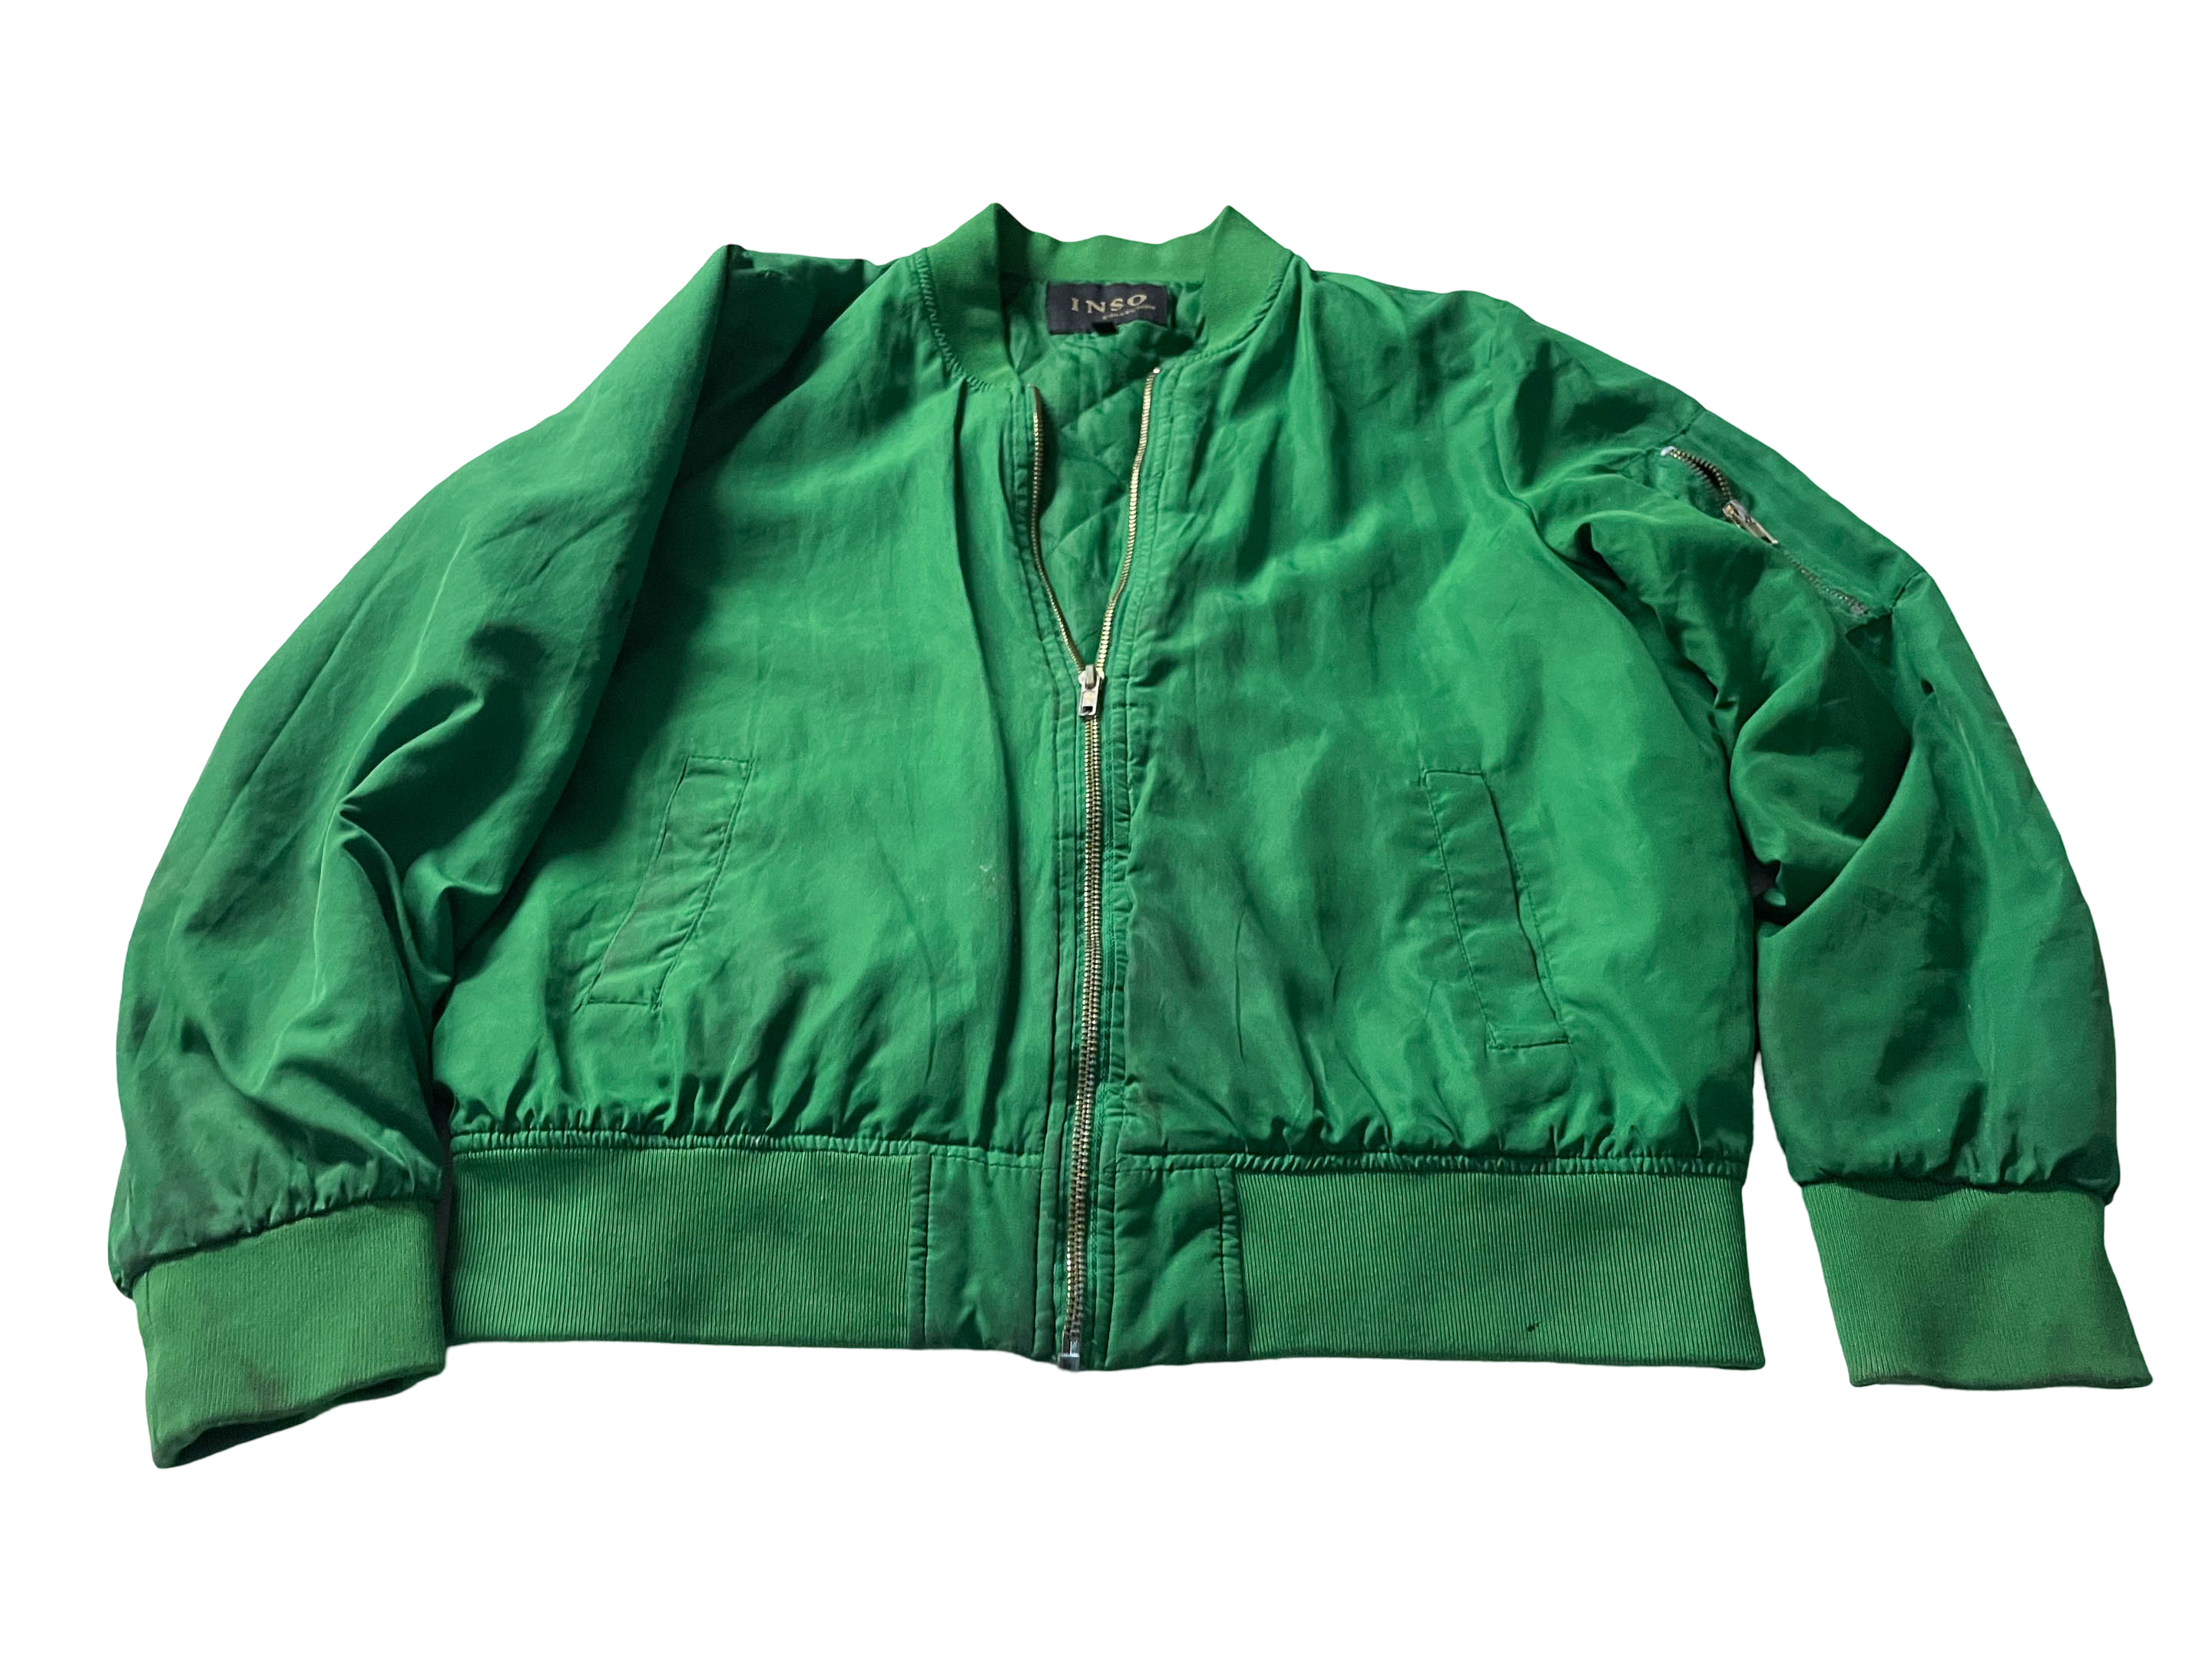 Women's Y2K Inso collection green full zip bomber jacket in XL|L25 W22|SKU 4040